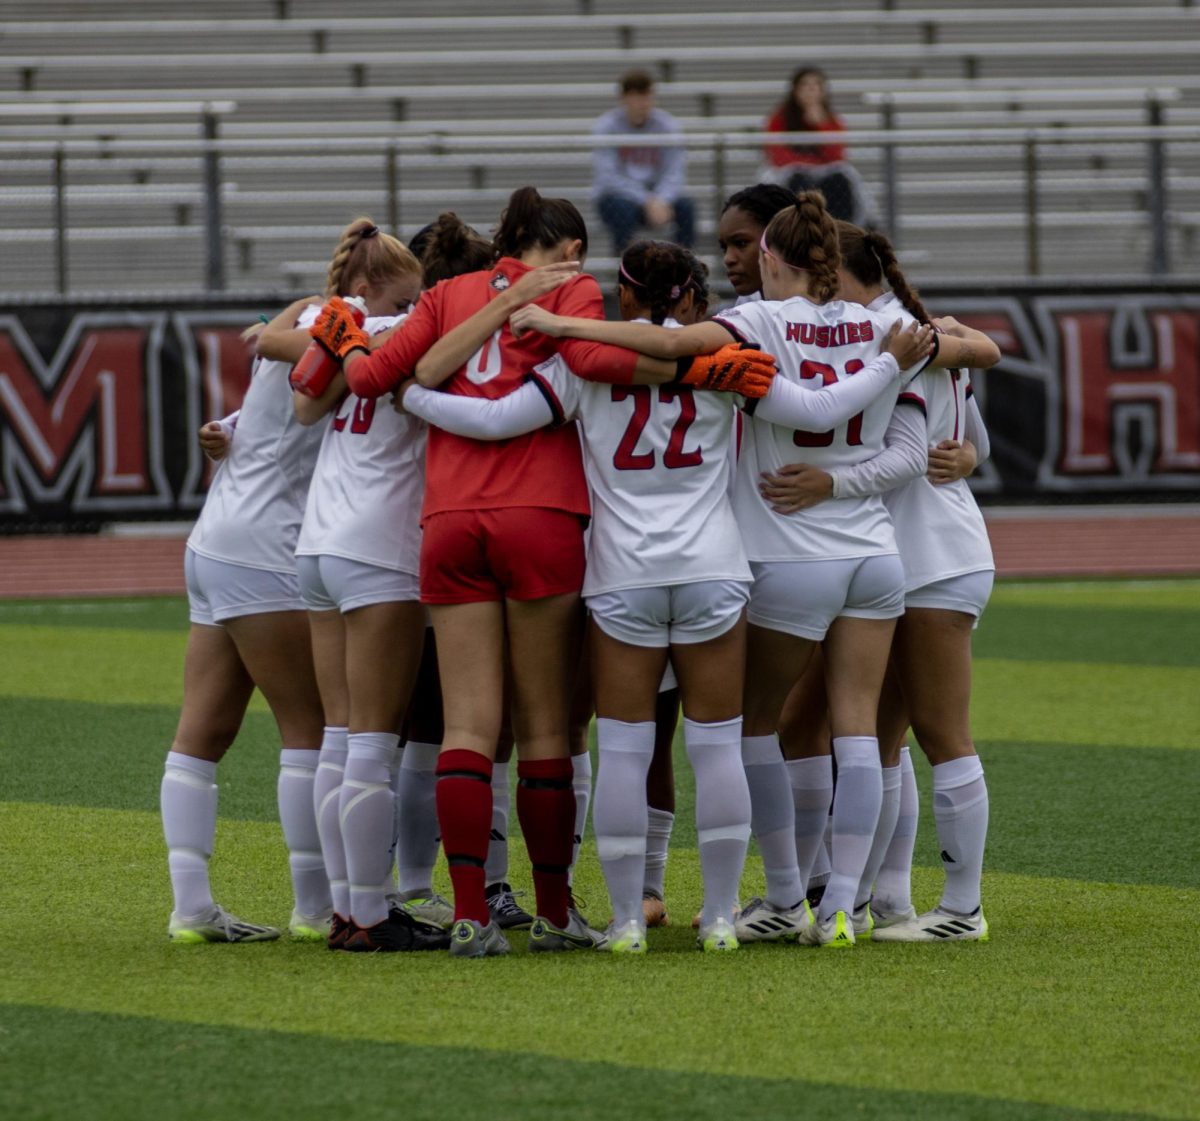 The+NIU+women%E2%80%99s+soccer+team+huddles+together+before+their+match+against+Buffalo.+The+Huskies+clinched+a+MAC+Tournament+berth+with+a+victory+over+the+Central+Michigan+University+Chippewas+on+Sunday.+%28Tim+Dodge+%7C+Northern+Star%29%0A%0A